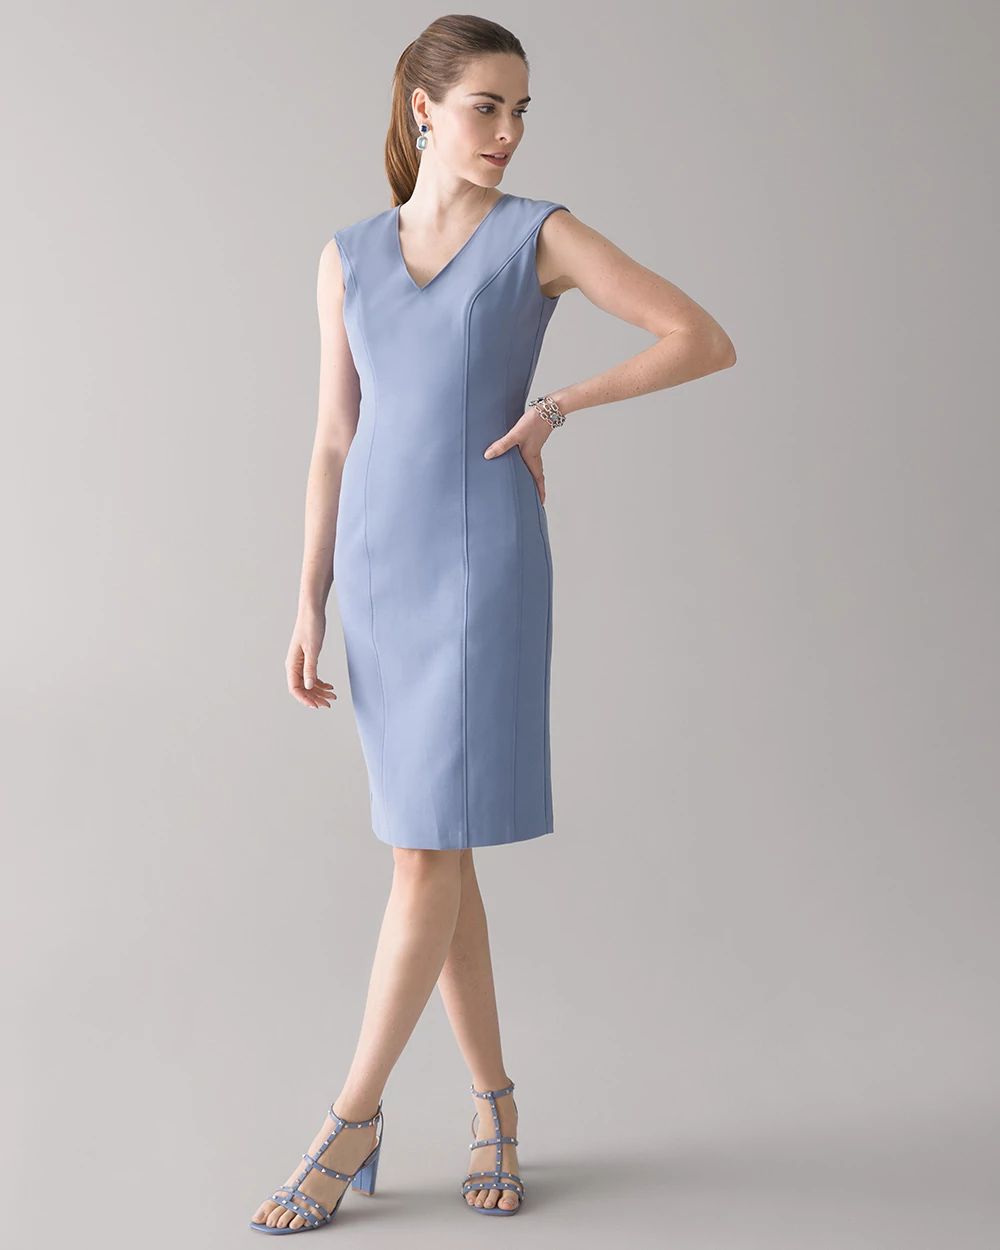 Sleeveless Comfort Stretch Sheath Dress click to view larger image.